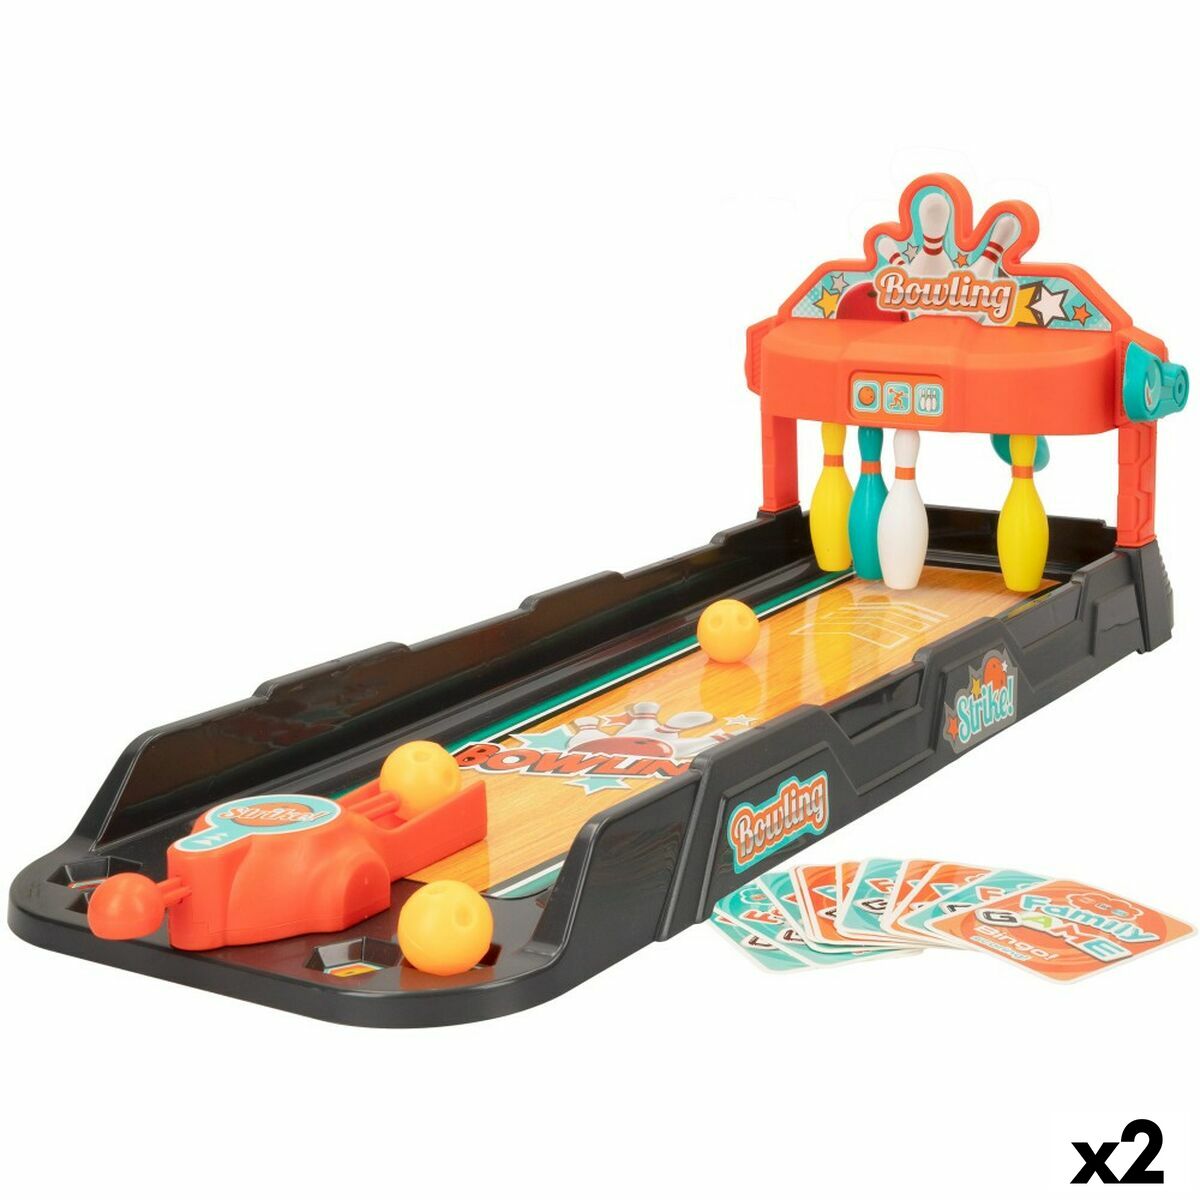 Aiming game Colorbaby Bowling 24 x 23 x 62,5 cm (2 Units)